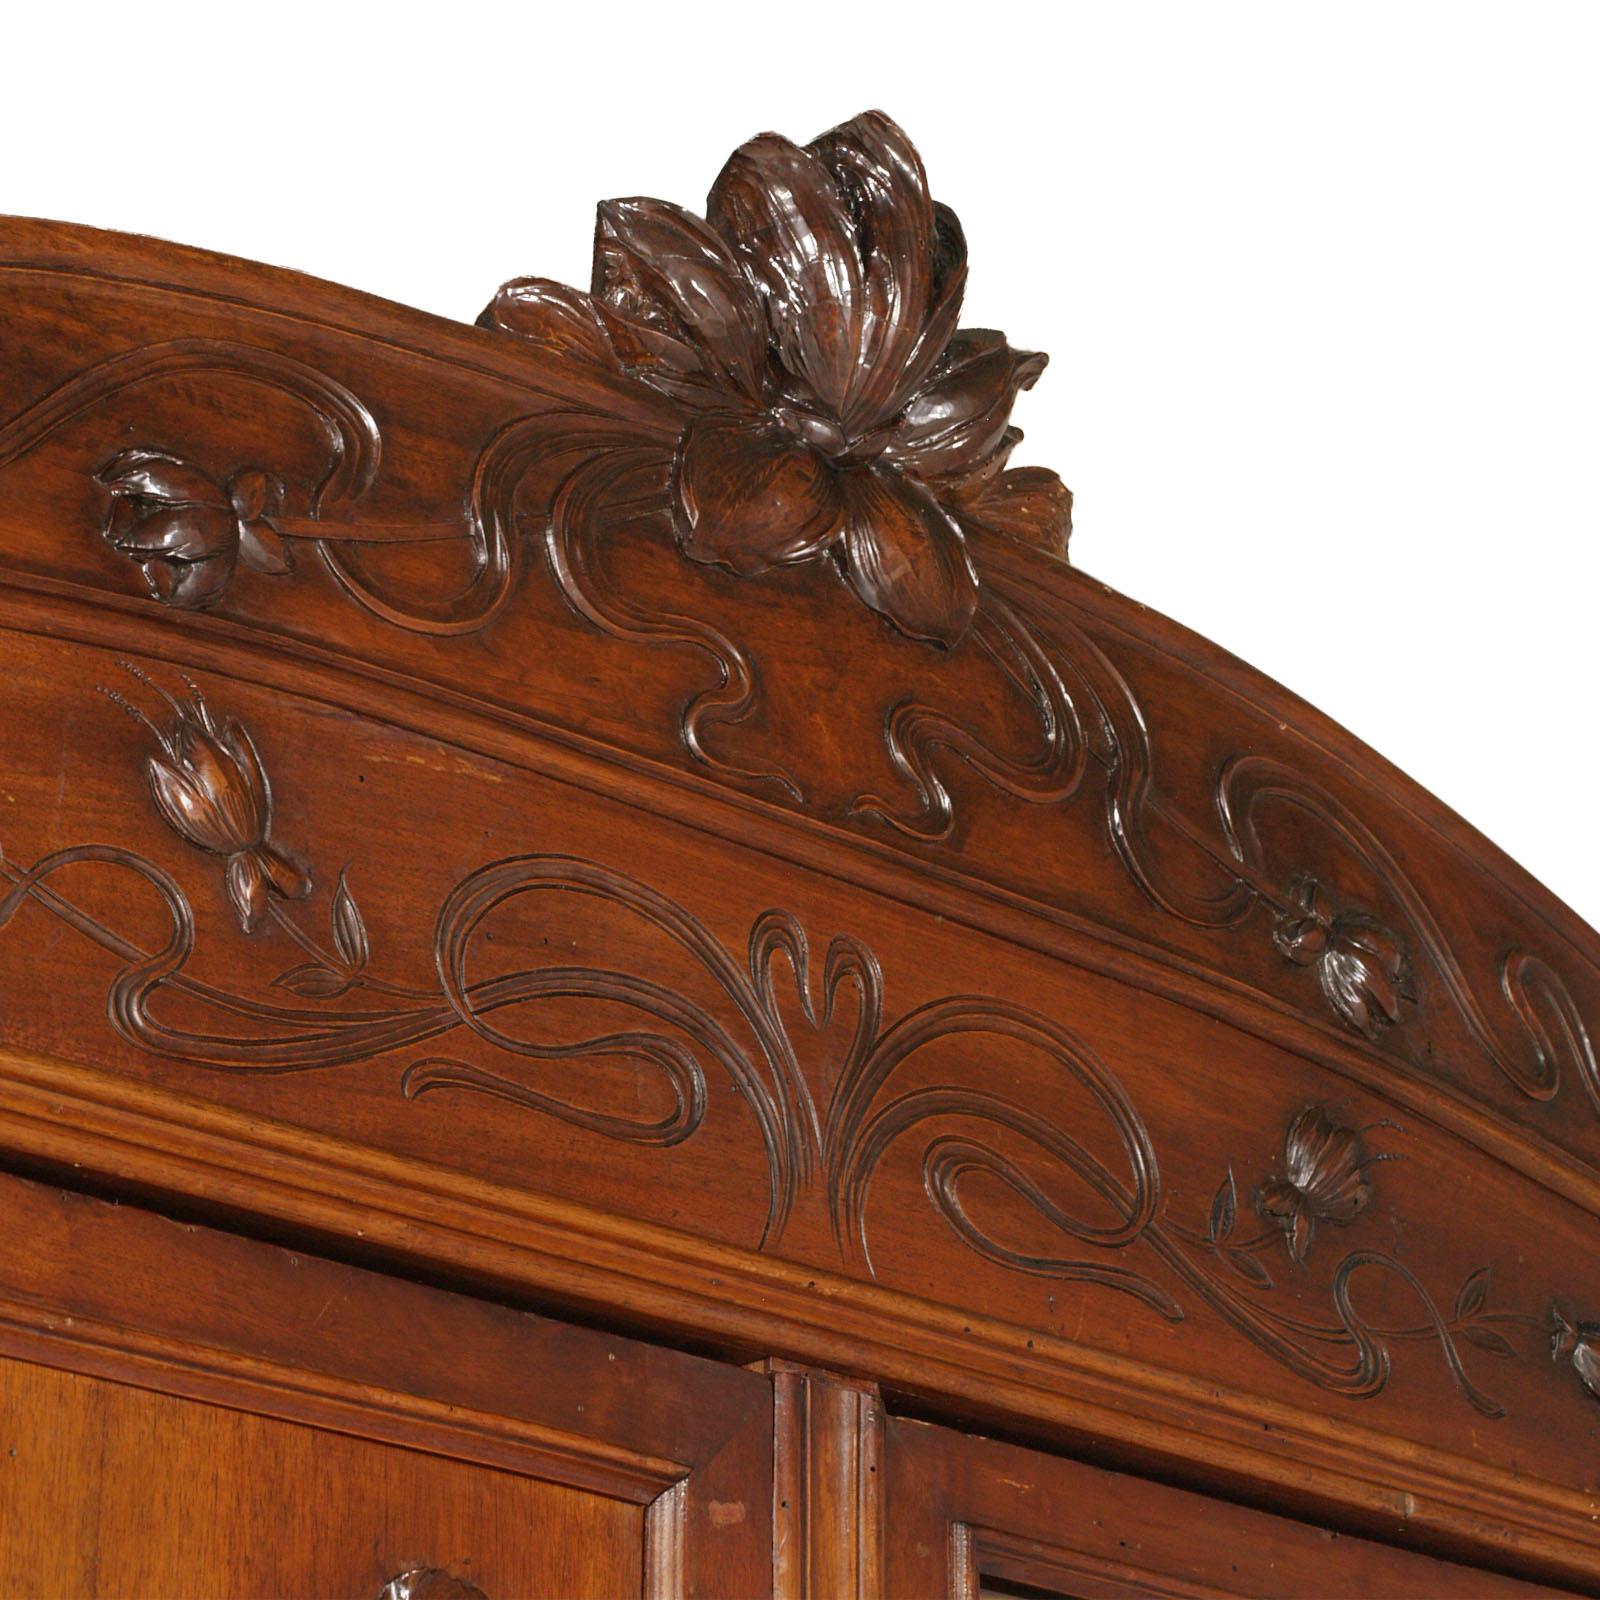 This important chest of drowers, wardrobe, in solid walnut, is masterfully carved by hand by the great sculptor artist Vincenzo Cadorin and his Atelier performers: floral motifs and classic art nouveau shapes, carved and embossed
All original and